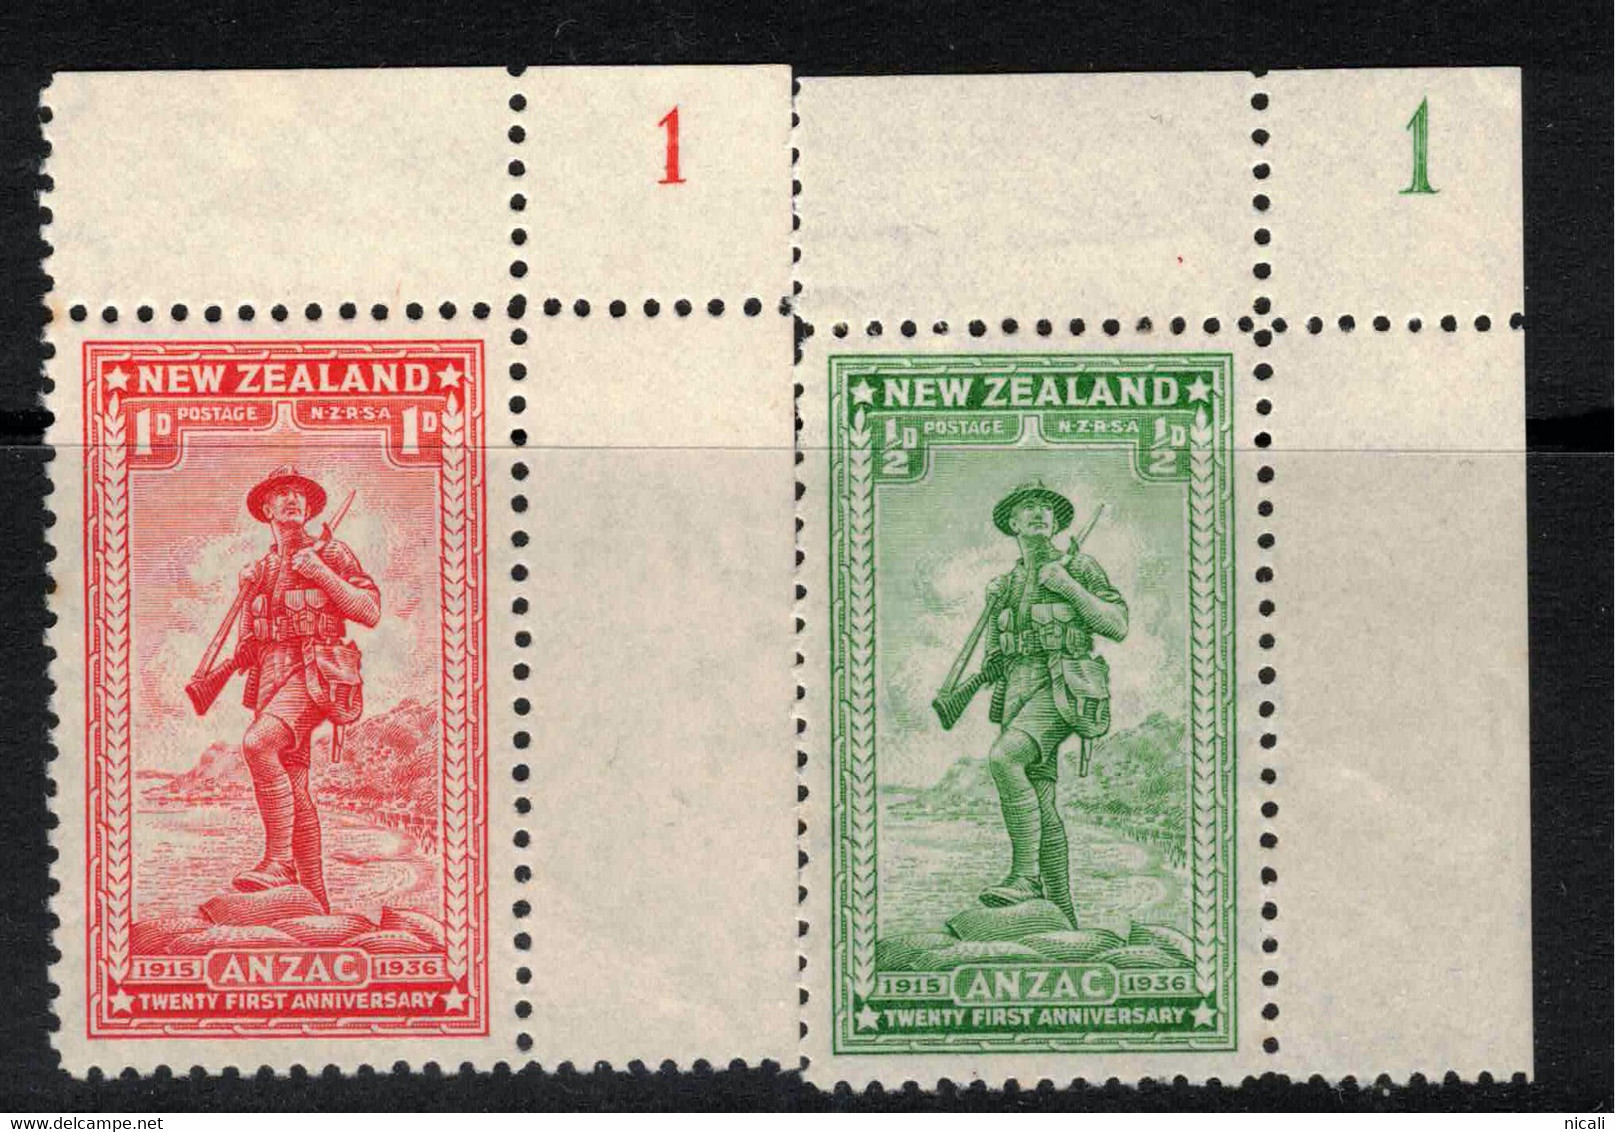 NZ 1936 ANZAC Plate Numbers SG 591-2 HM #AIP19 - Unused Stamps